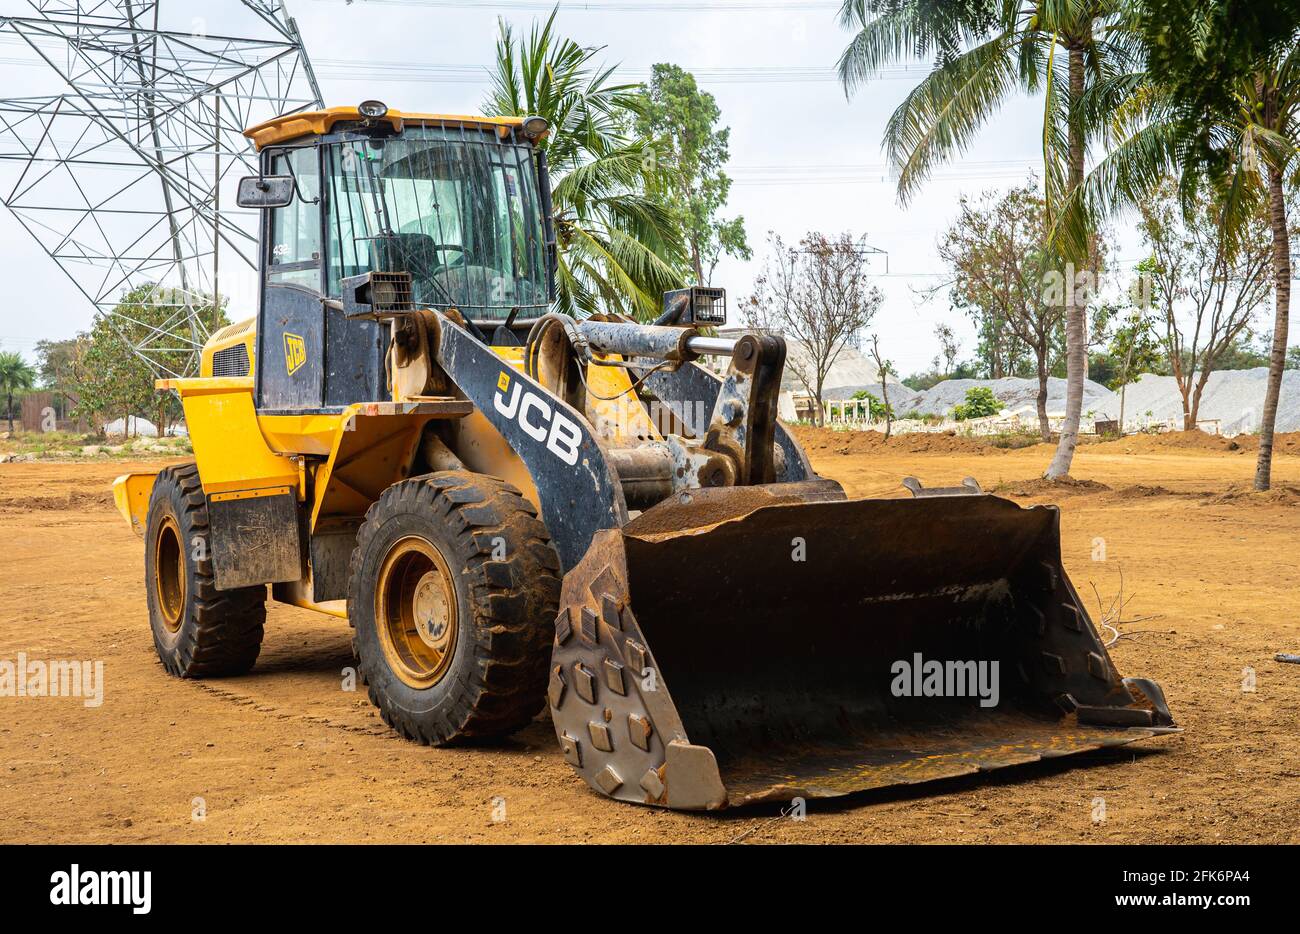 The JCB 432 ZX is a popular wheel loader that can handle the toughest digging and dump situations. Stock Photo